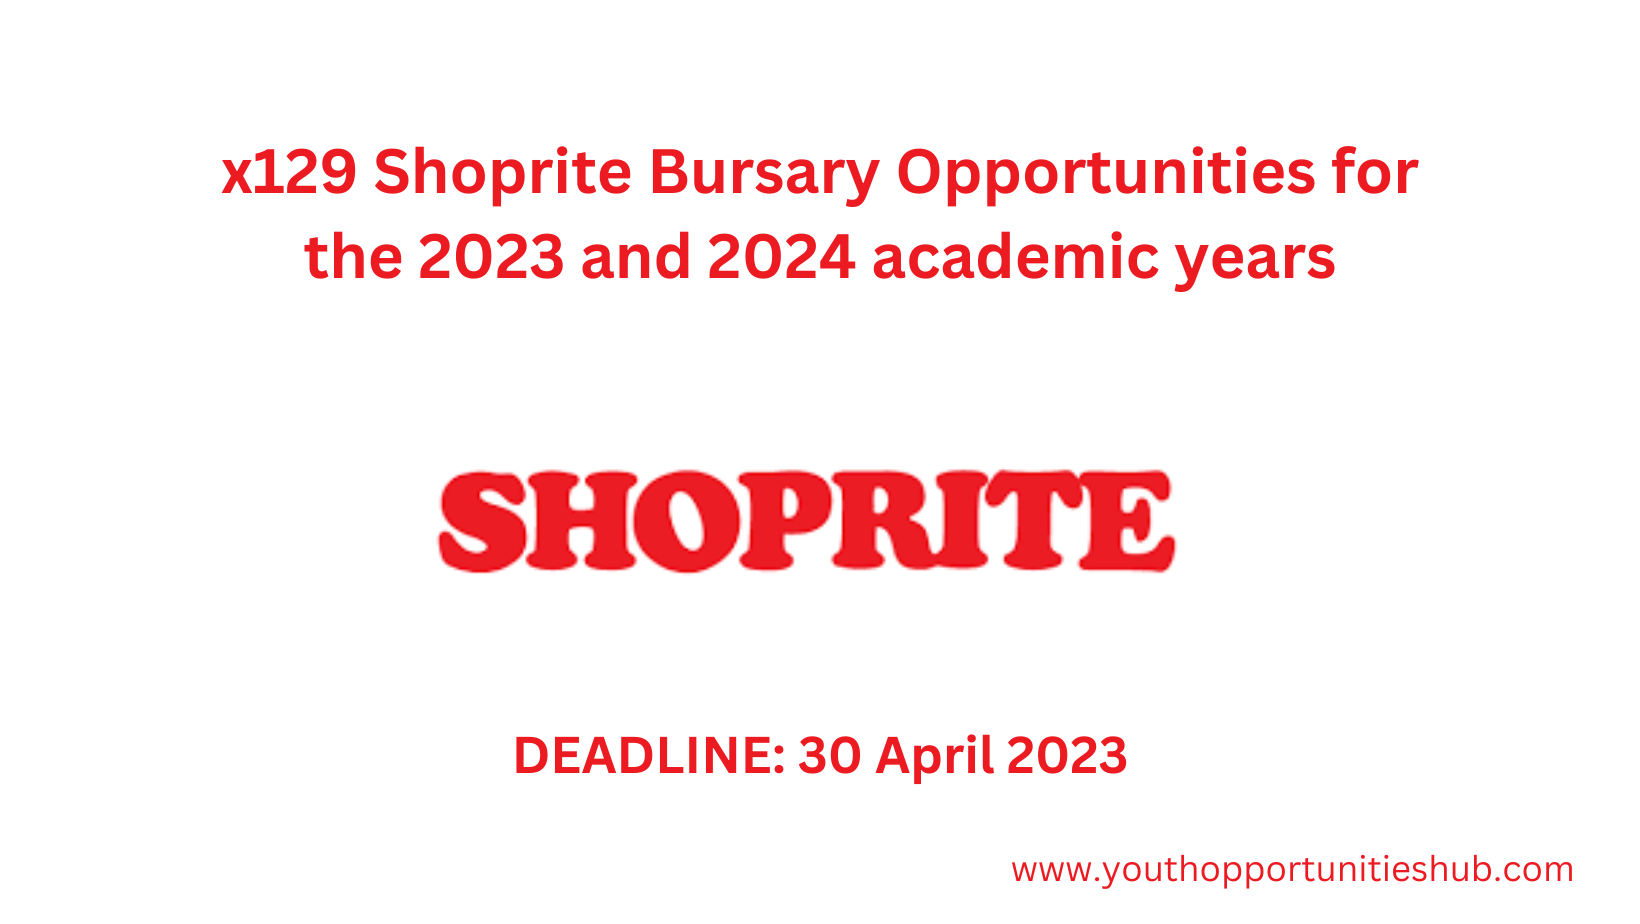 x129 Shoprite Bursary Opportunities for the 2023 and 2024 academic